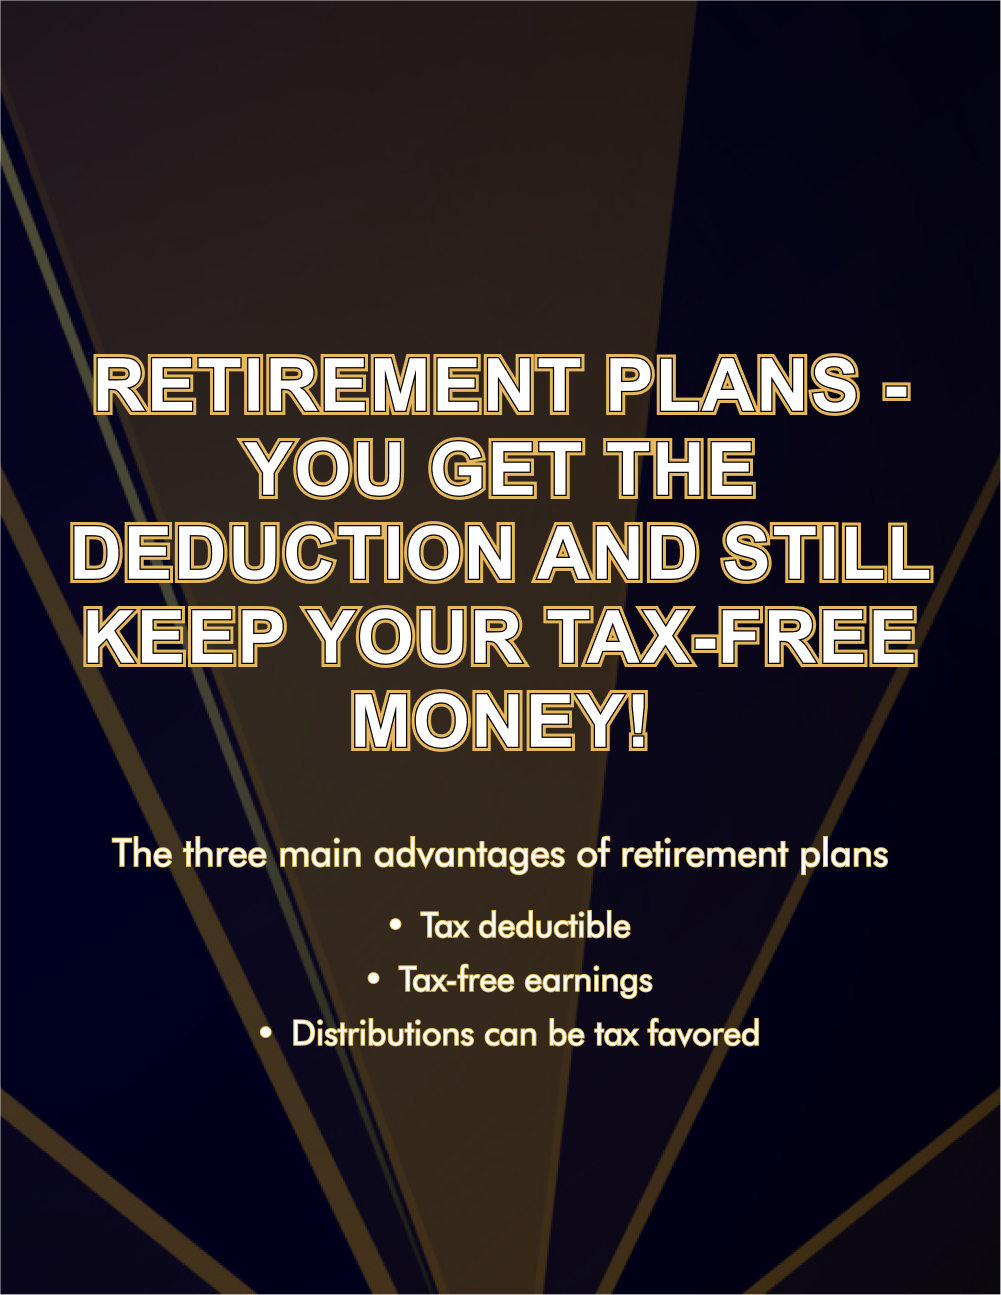 Retirement Plans - You Get The Deduction And Still Keep Your Tax-Free Money!